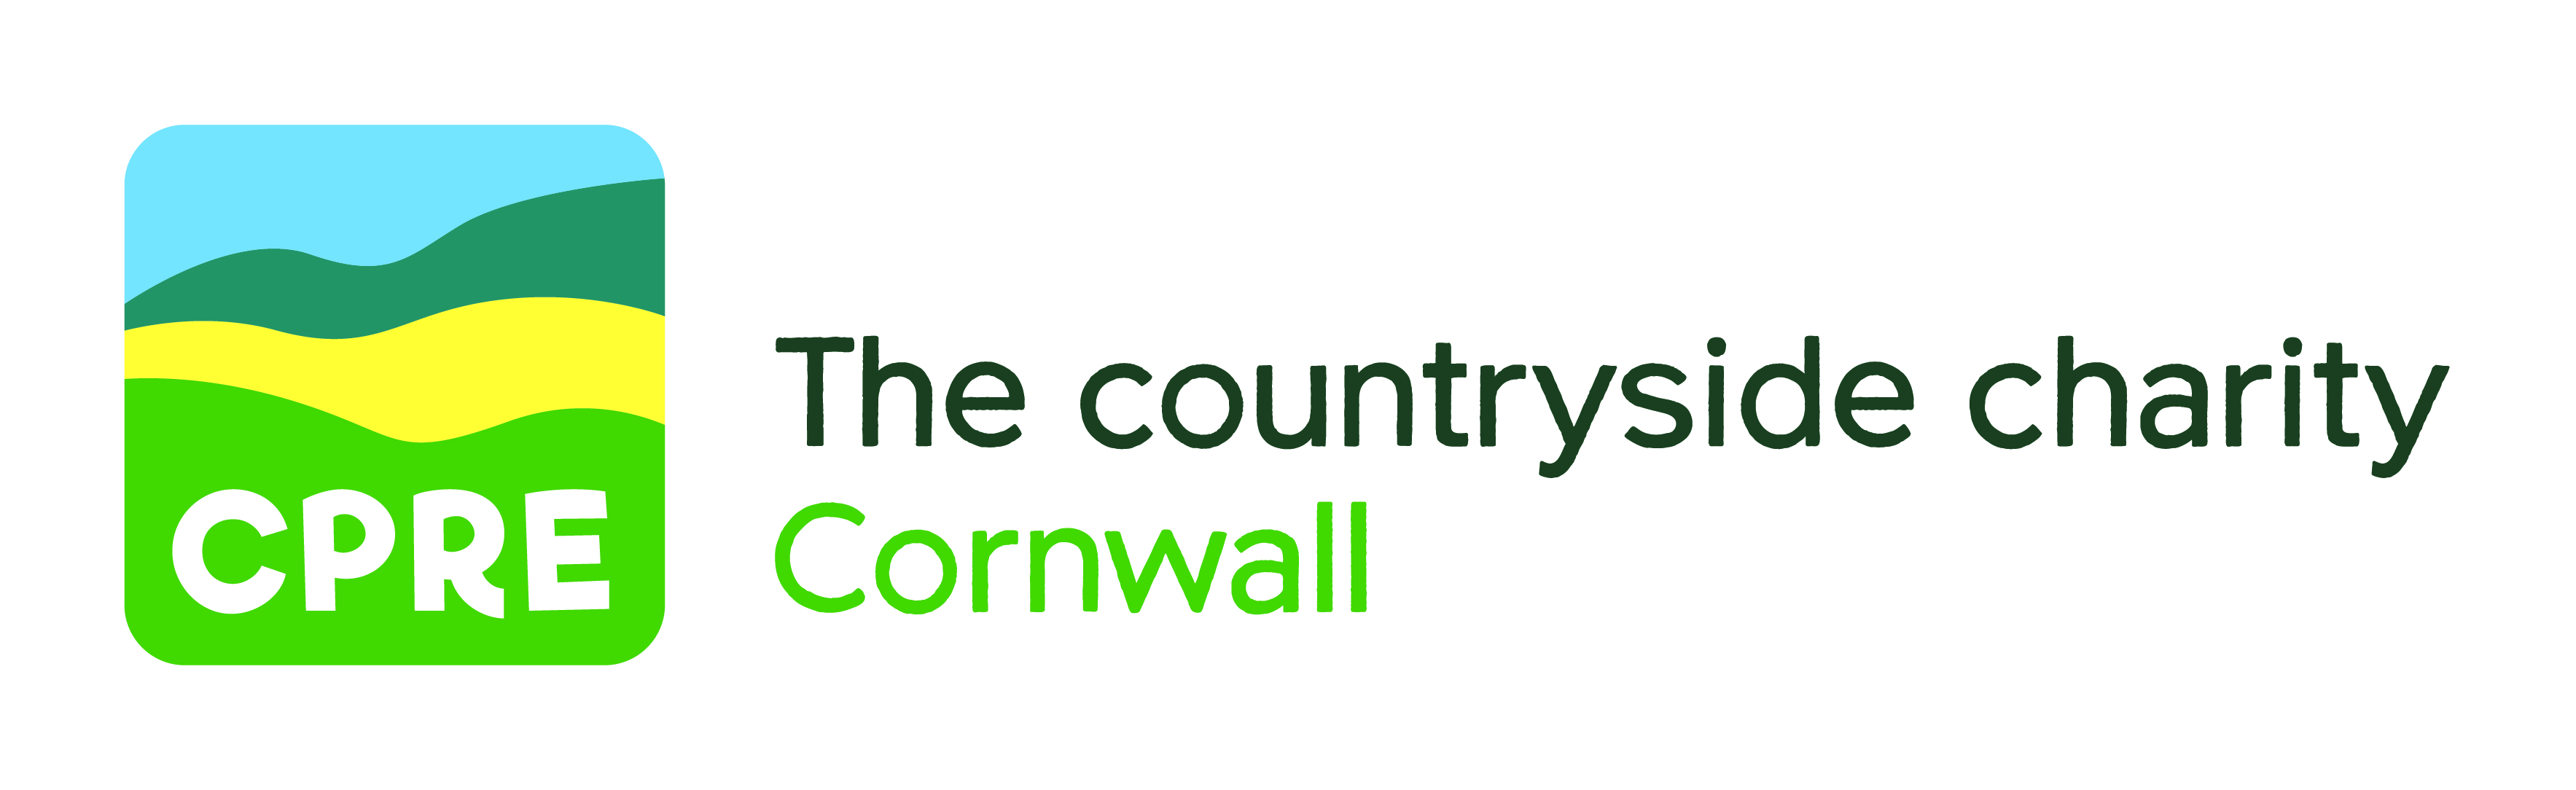 The countryside charity in a black font, underneath is Cornwall is a green font. Next to the logo which is split into four horizontal sections starting with a blue, dark green, yellow, and green sections. The last section states CPRE in a yellow font.